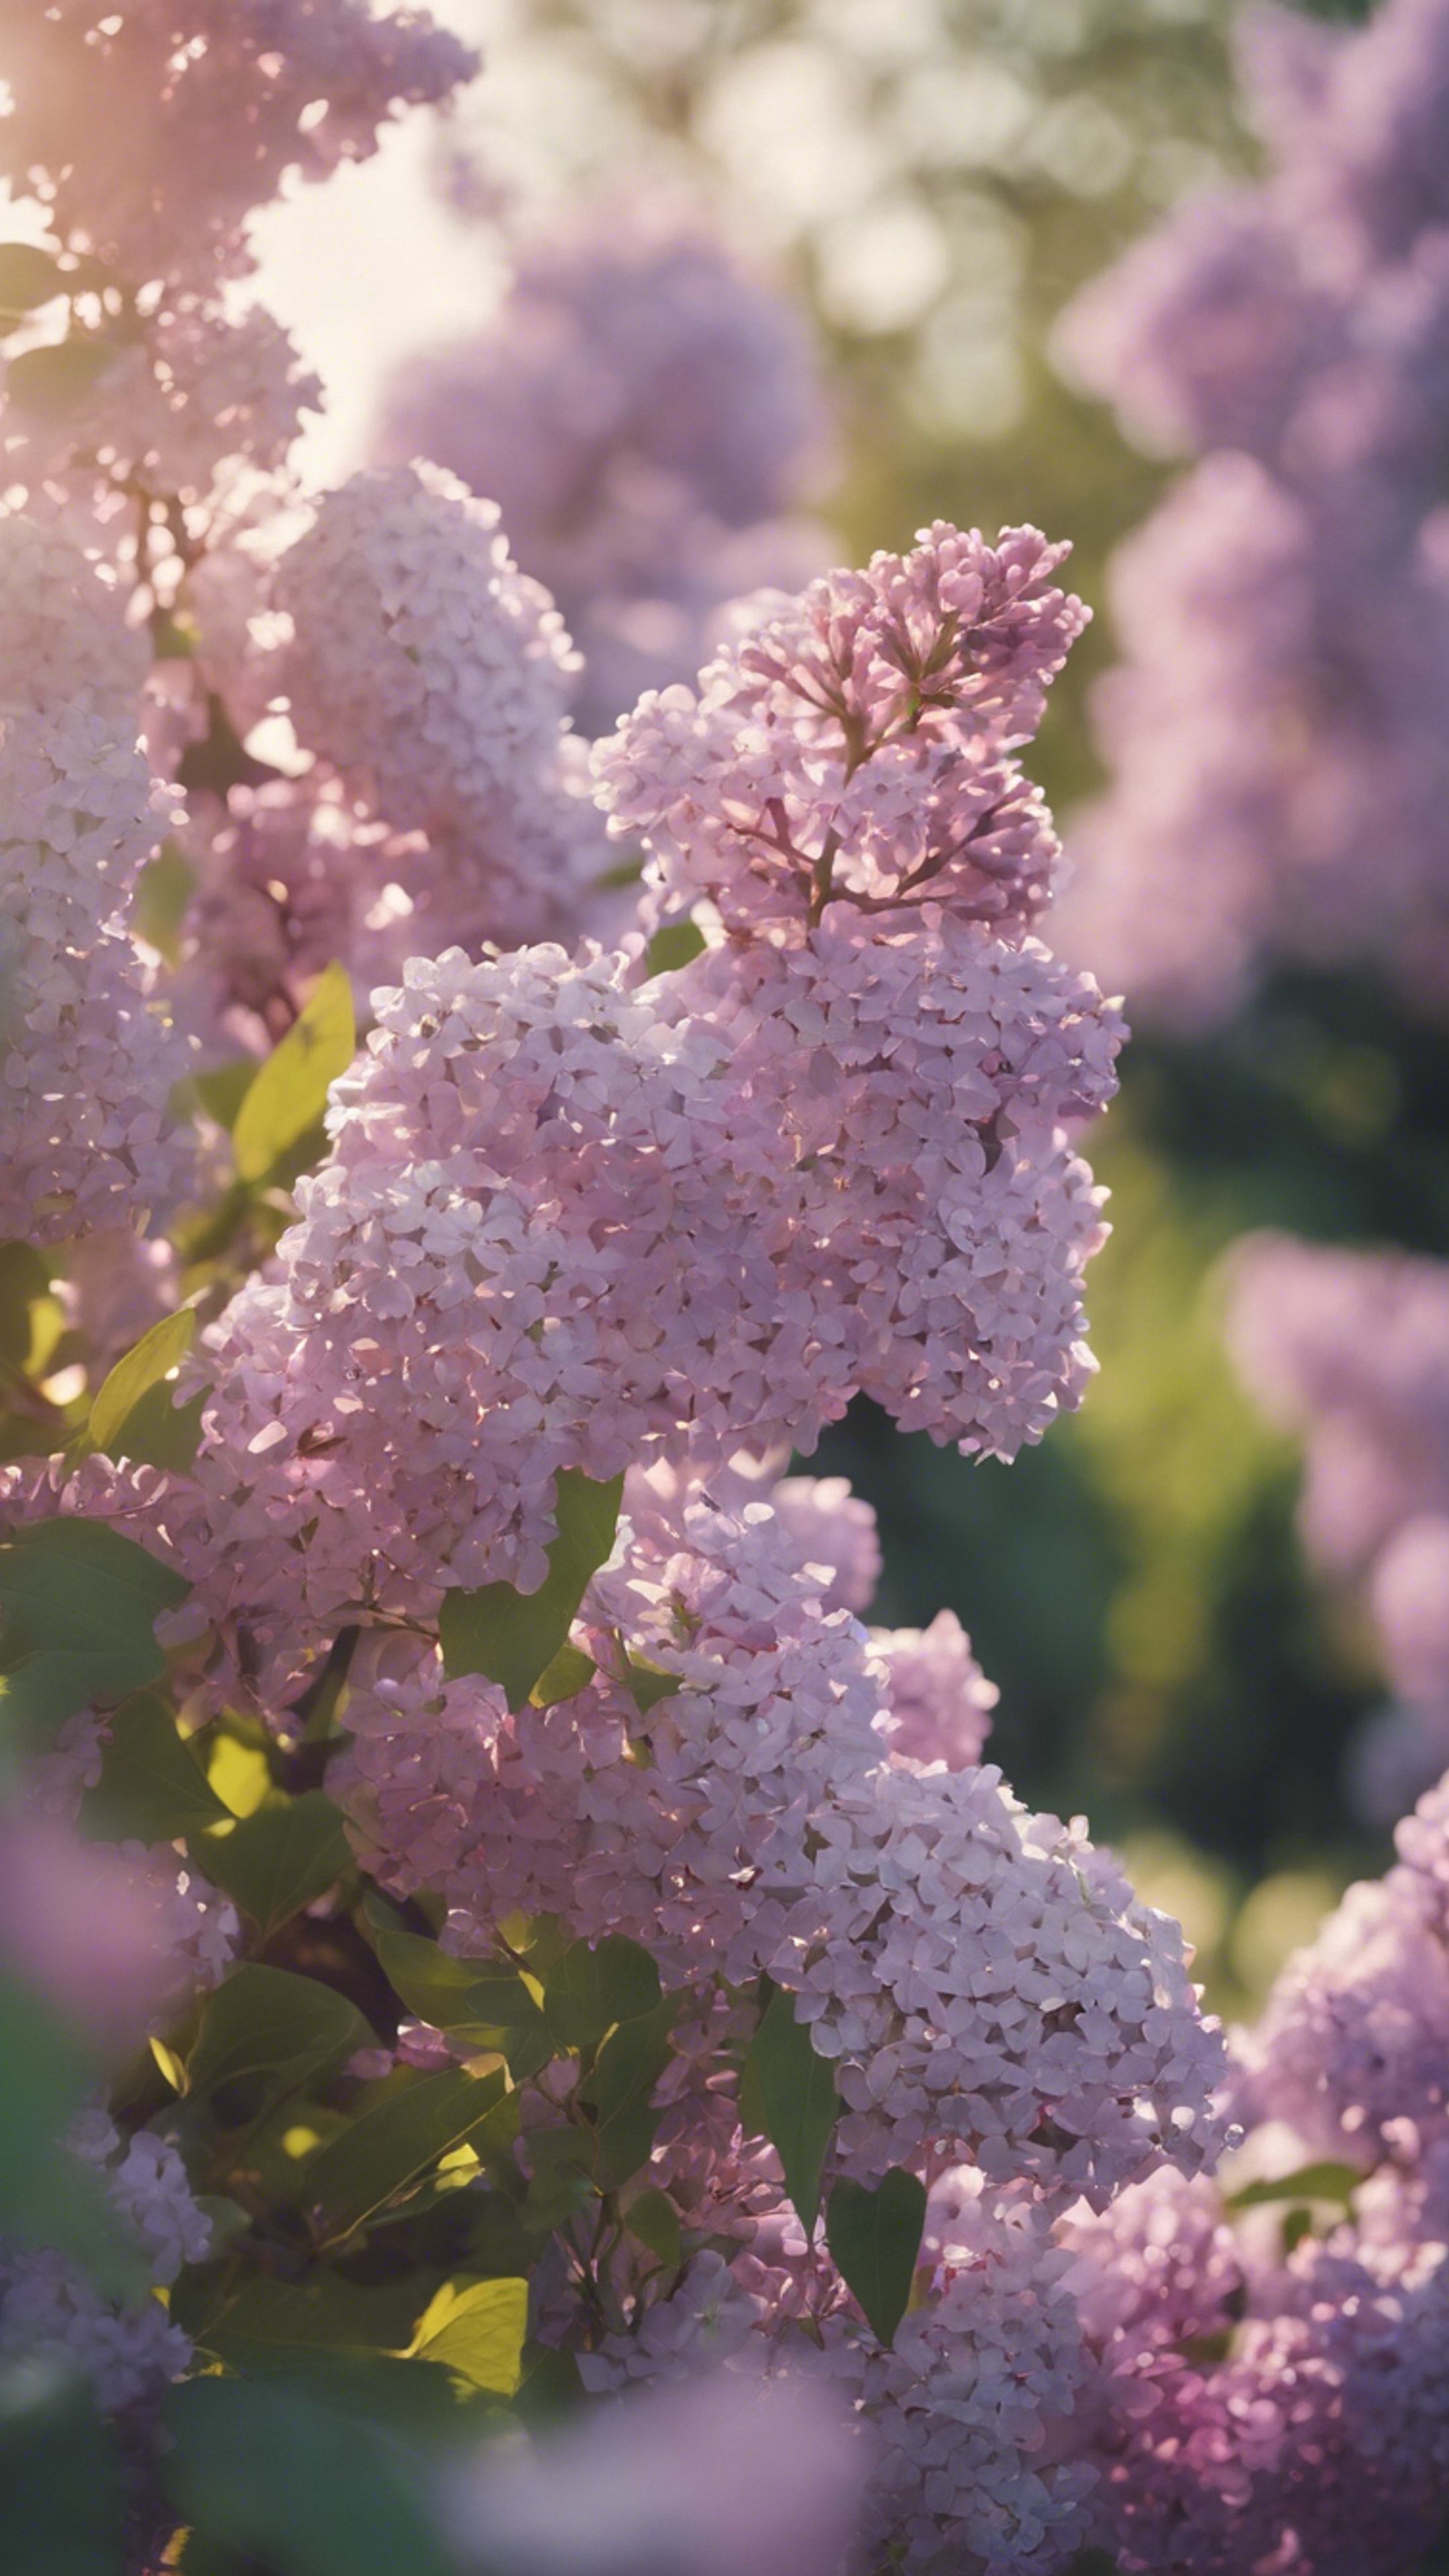 A bountiful garden full of preppy lilac flowers in full bloom under soft sunlight. Тапет[535239431e6946dc9128]